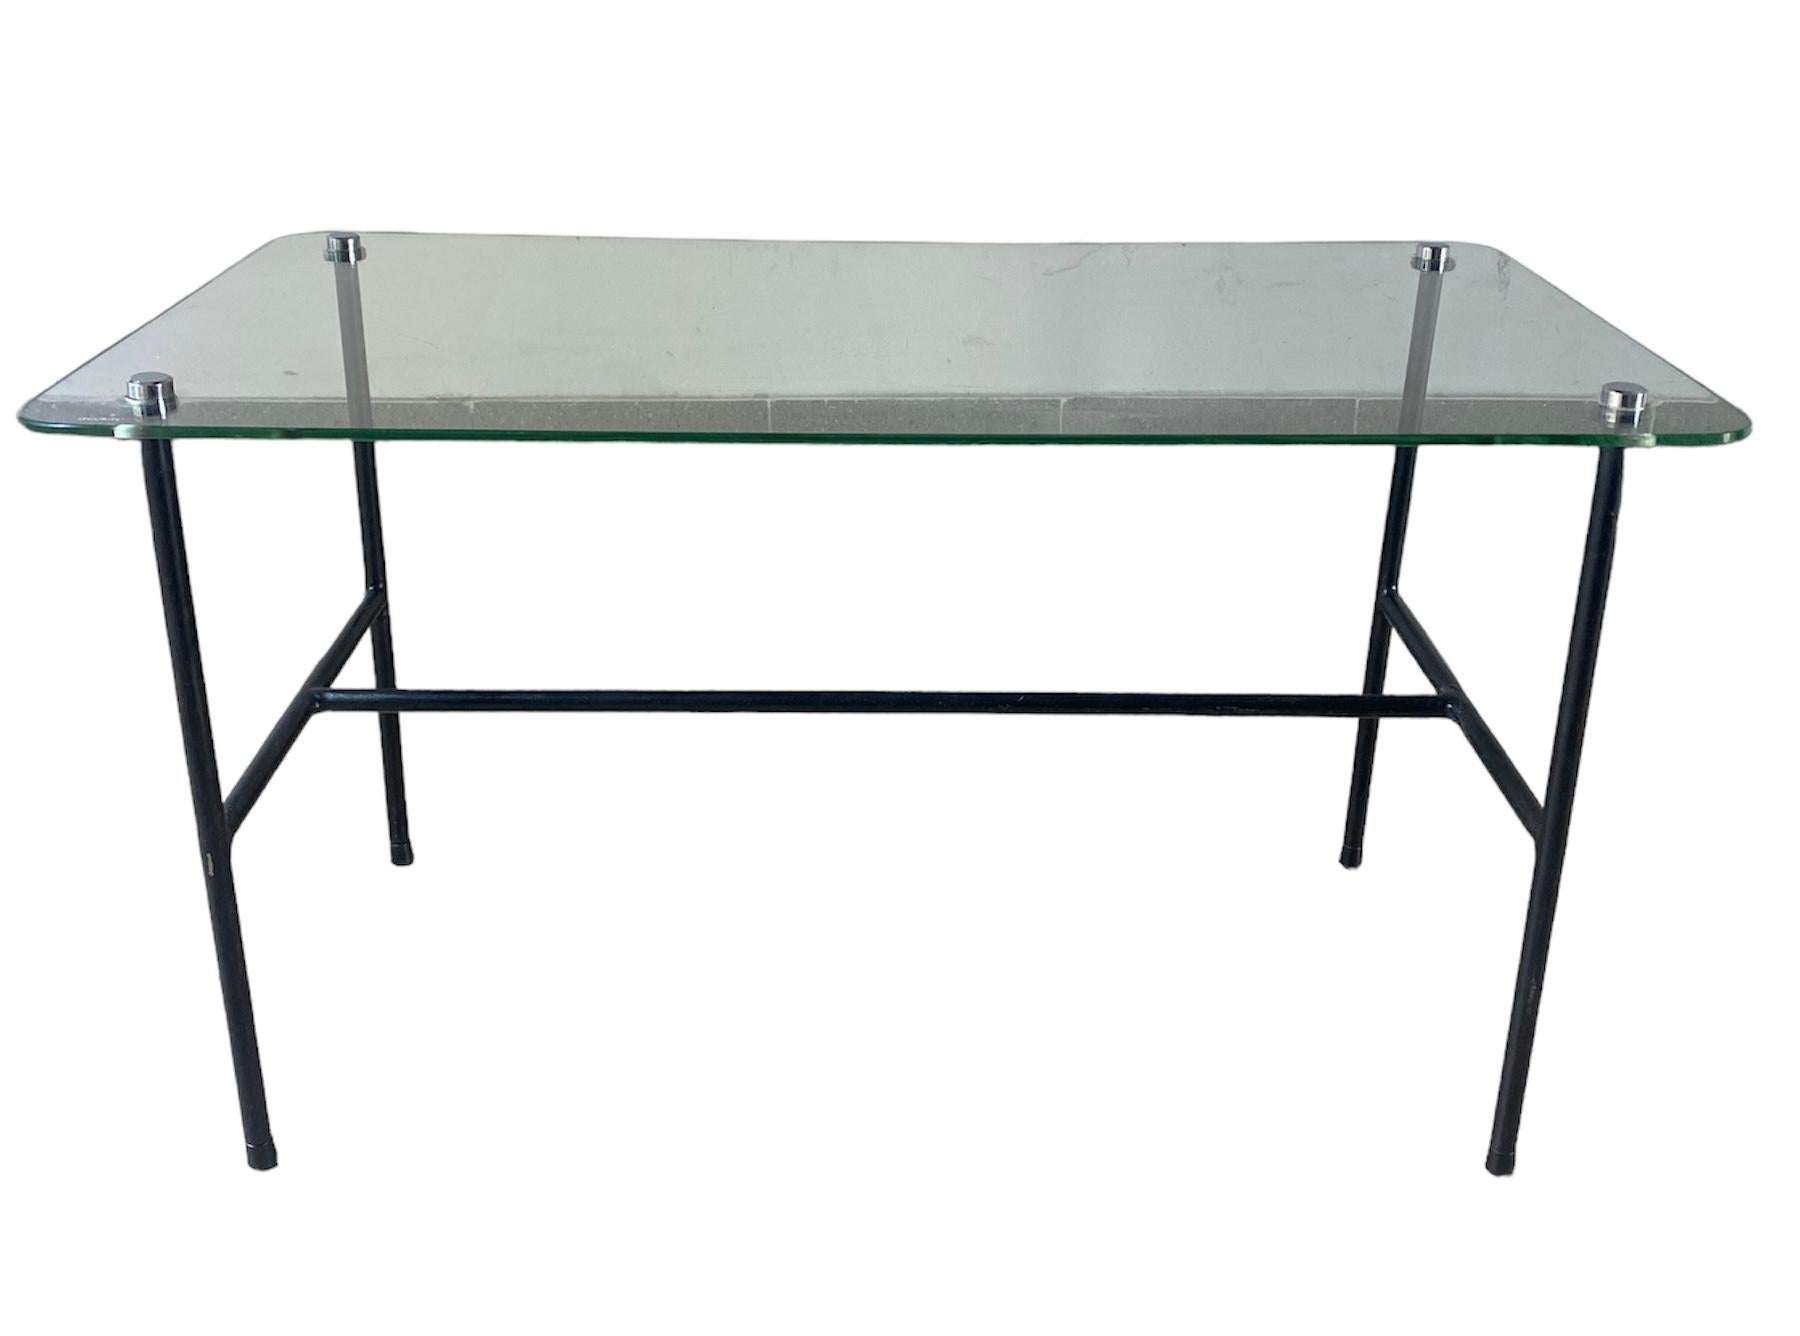 French Coffee Table Disderot Glass and Steel, Pierre Guariche, 1950 For Sale 5